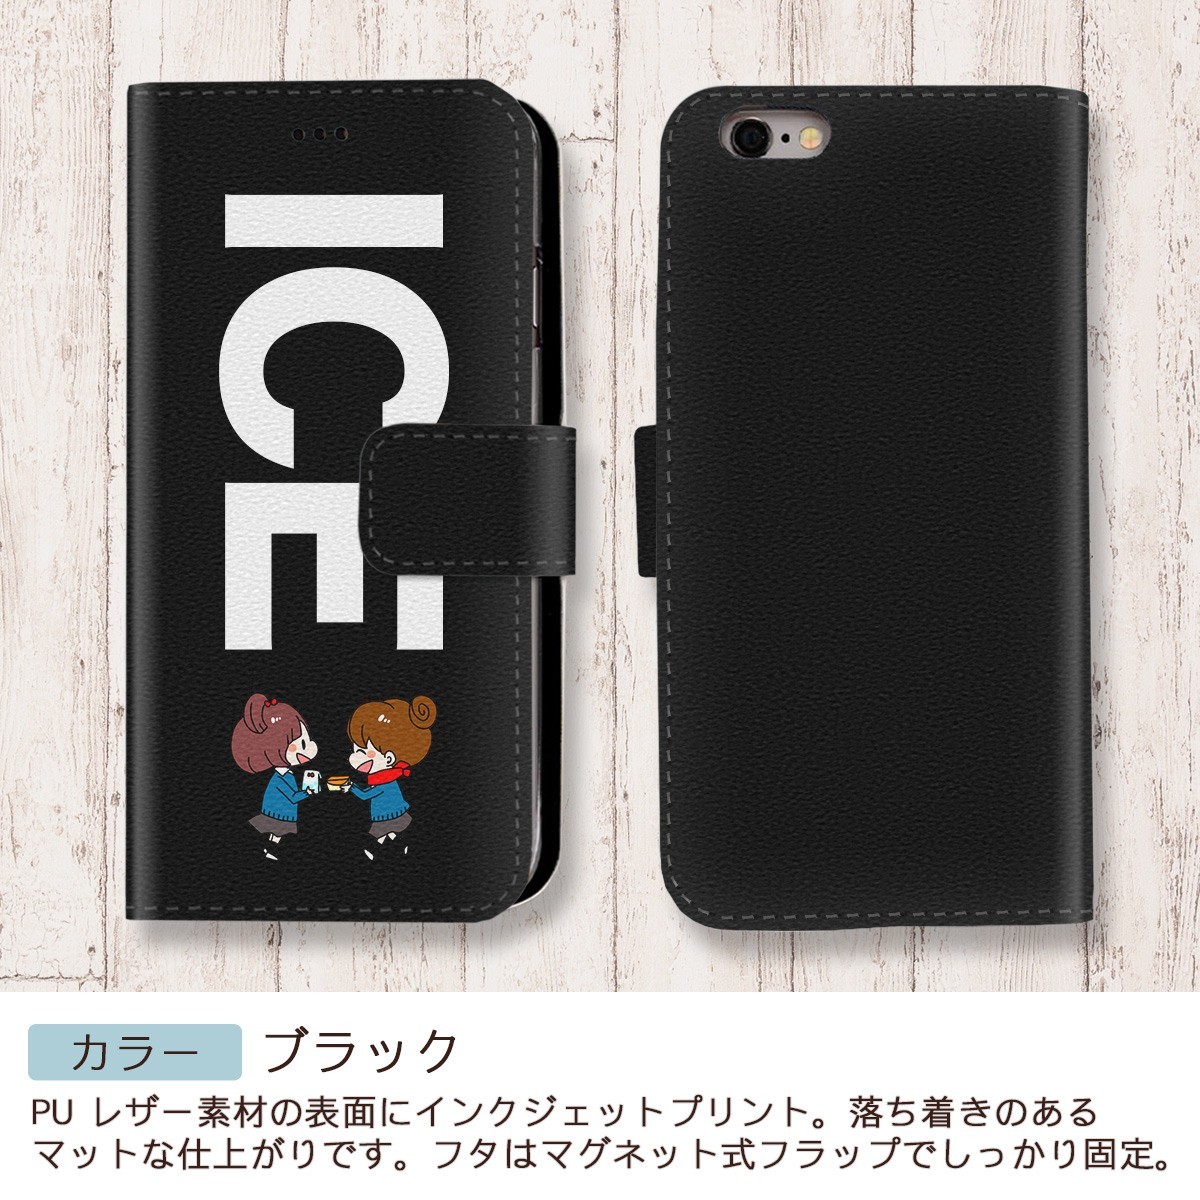 . chocolate interesting X XS case case iPhone X iPhone XS case notebook type iPhone lovely handsome men's lady's 